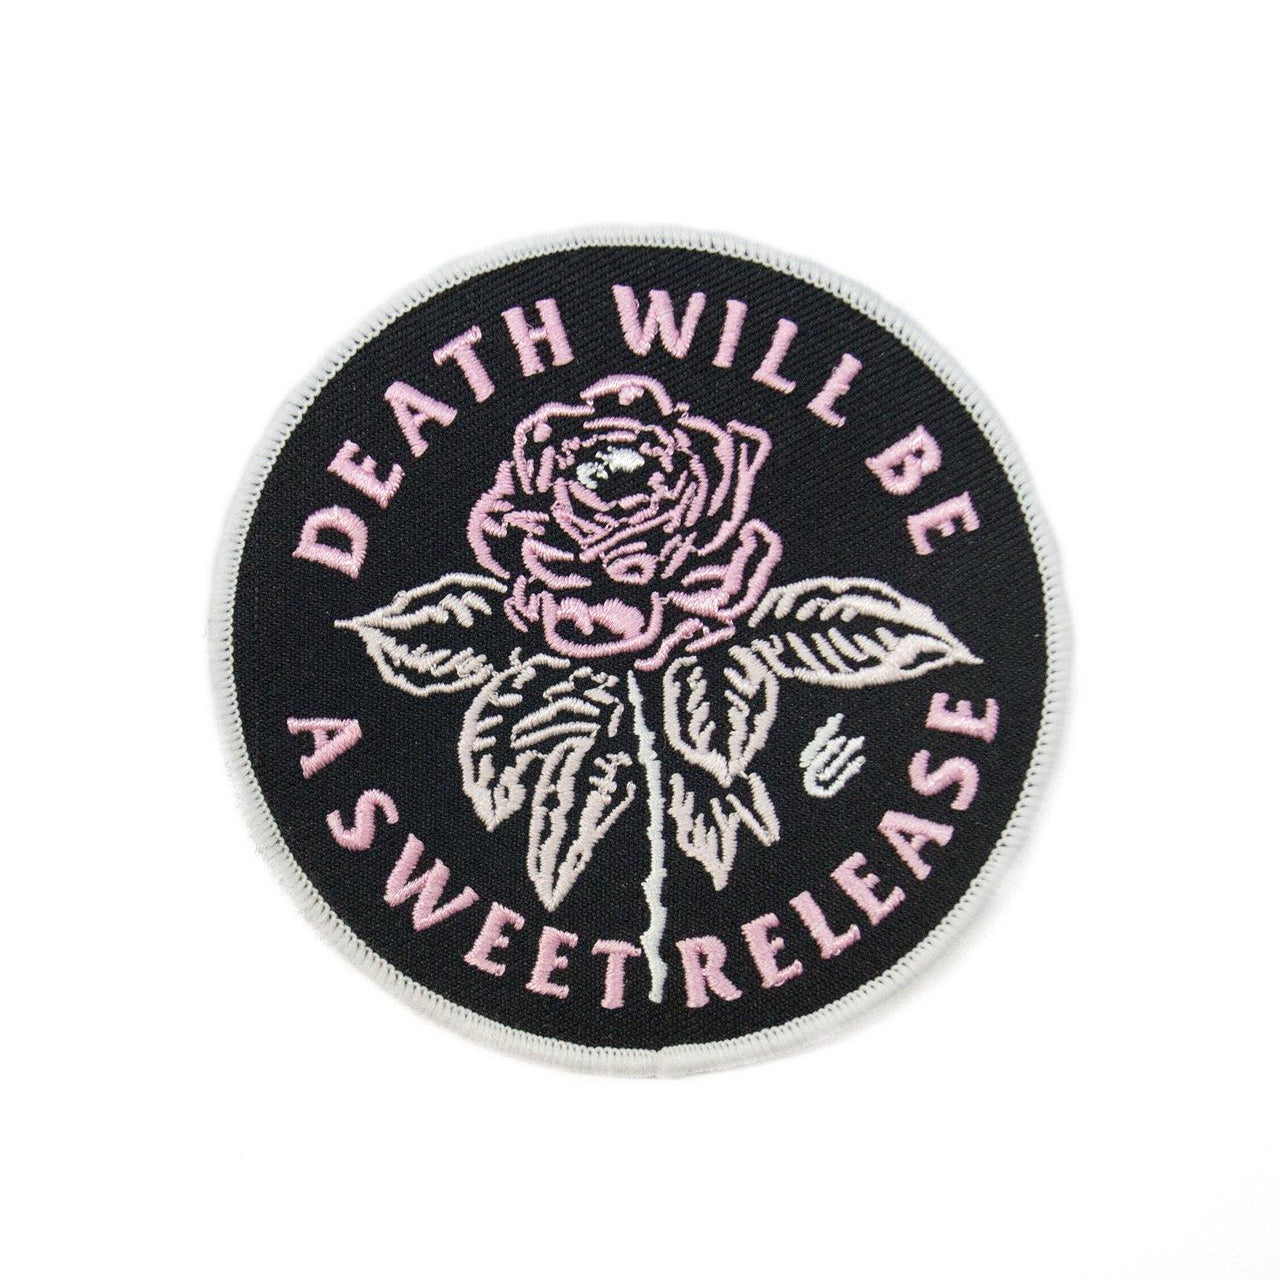 Buy – Cold Cuts Limited "Sweet Release" Patch – Band & Music Merch – Cold Cuts Merch